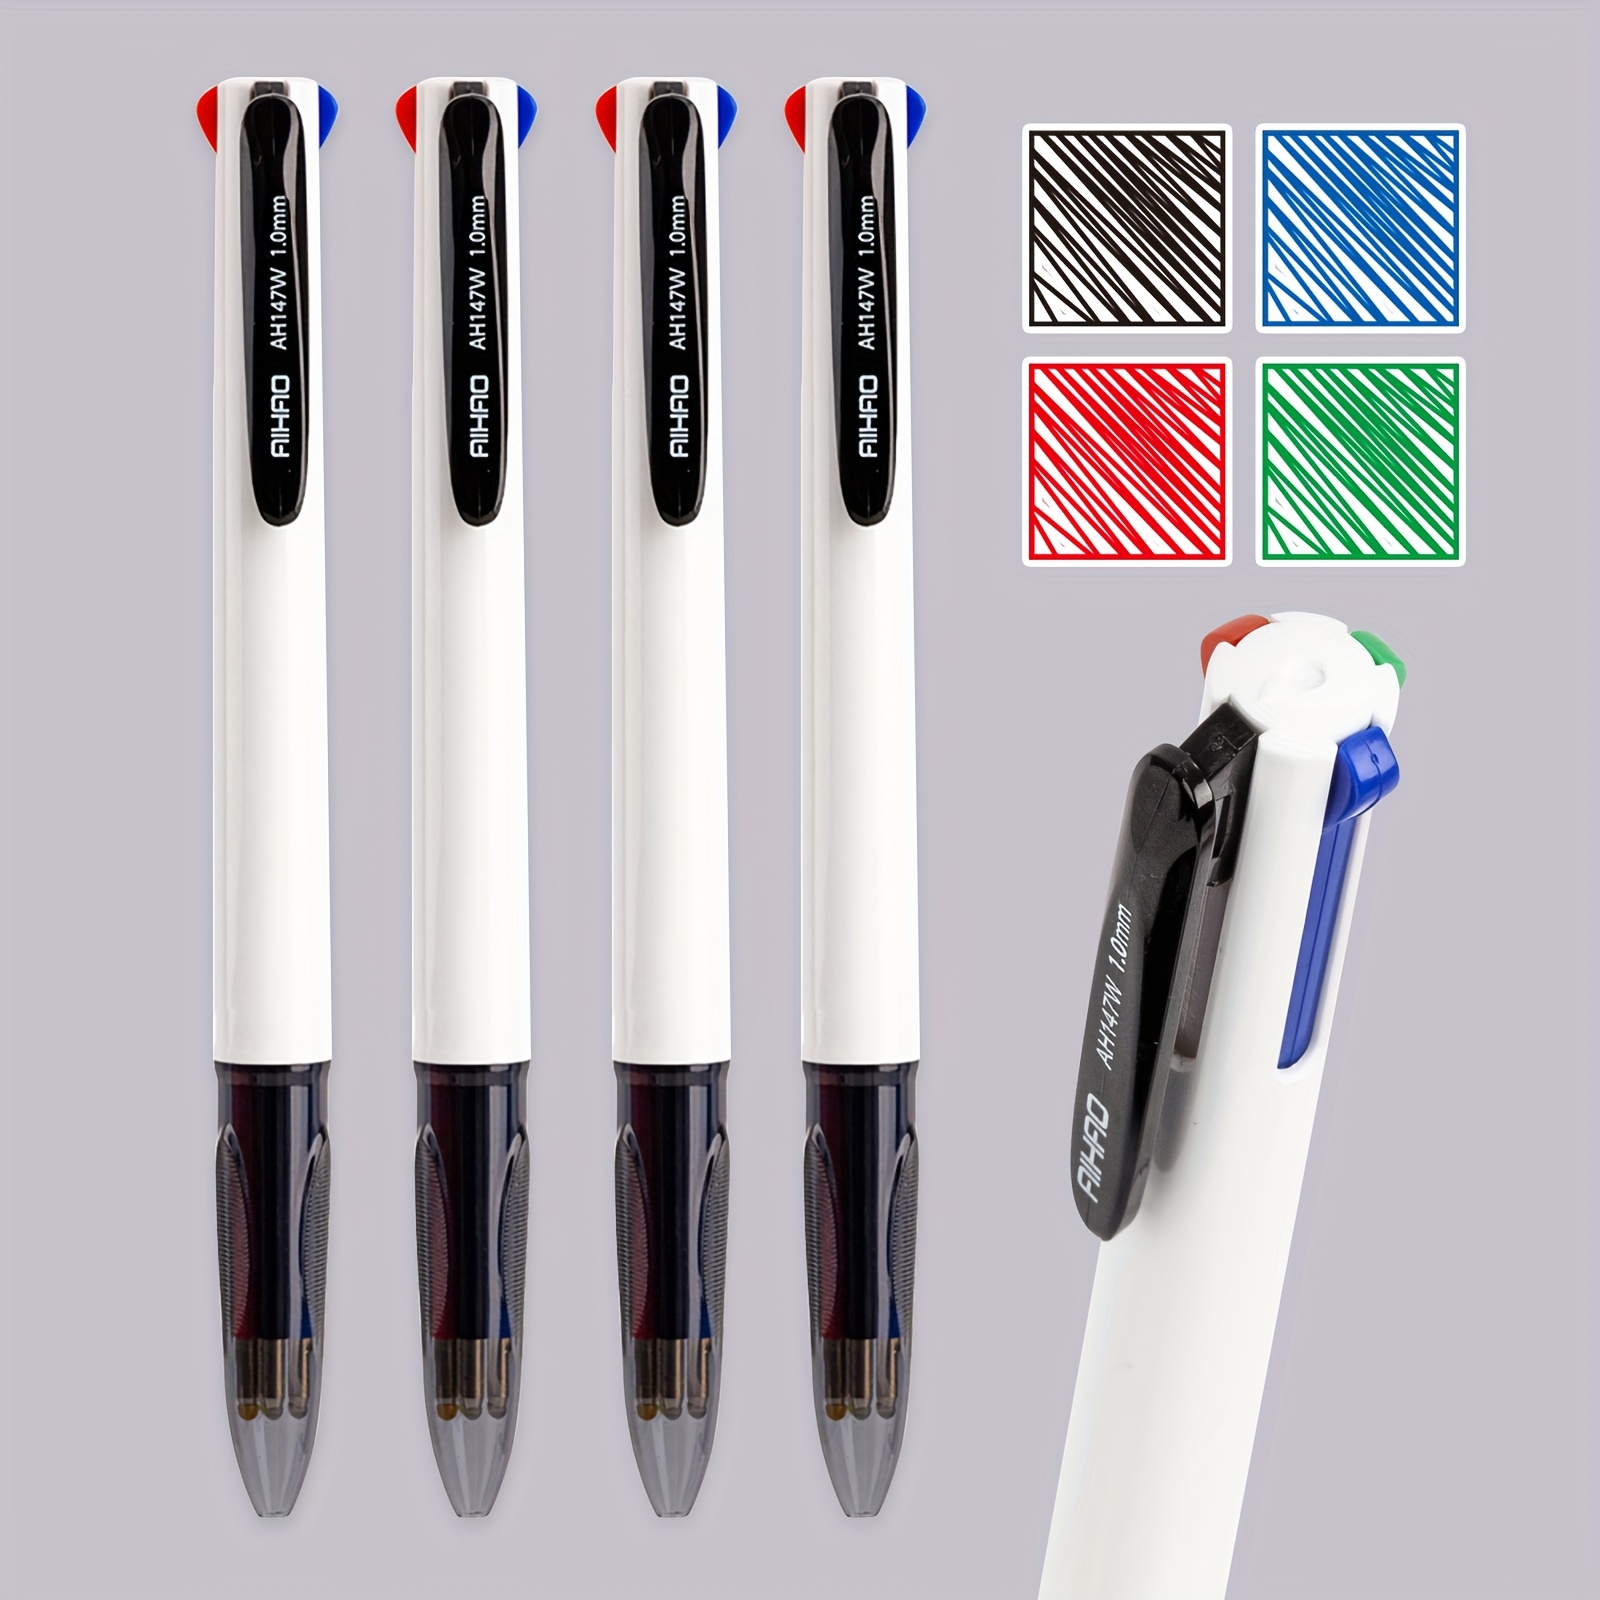 4 Pack 0.5mm 6-in-1 Multicolor Ballpoint Pen - Best for Smooth  Writing-Retractab